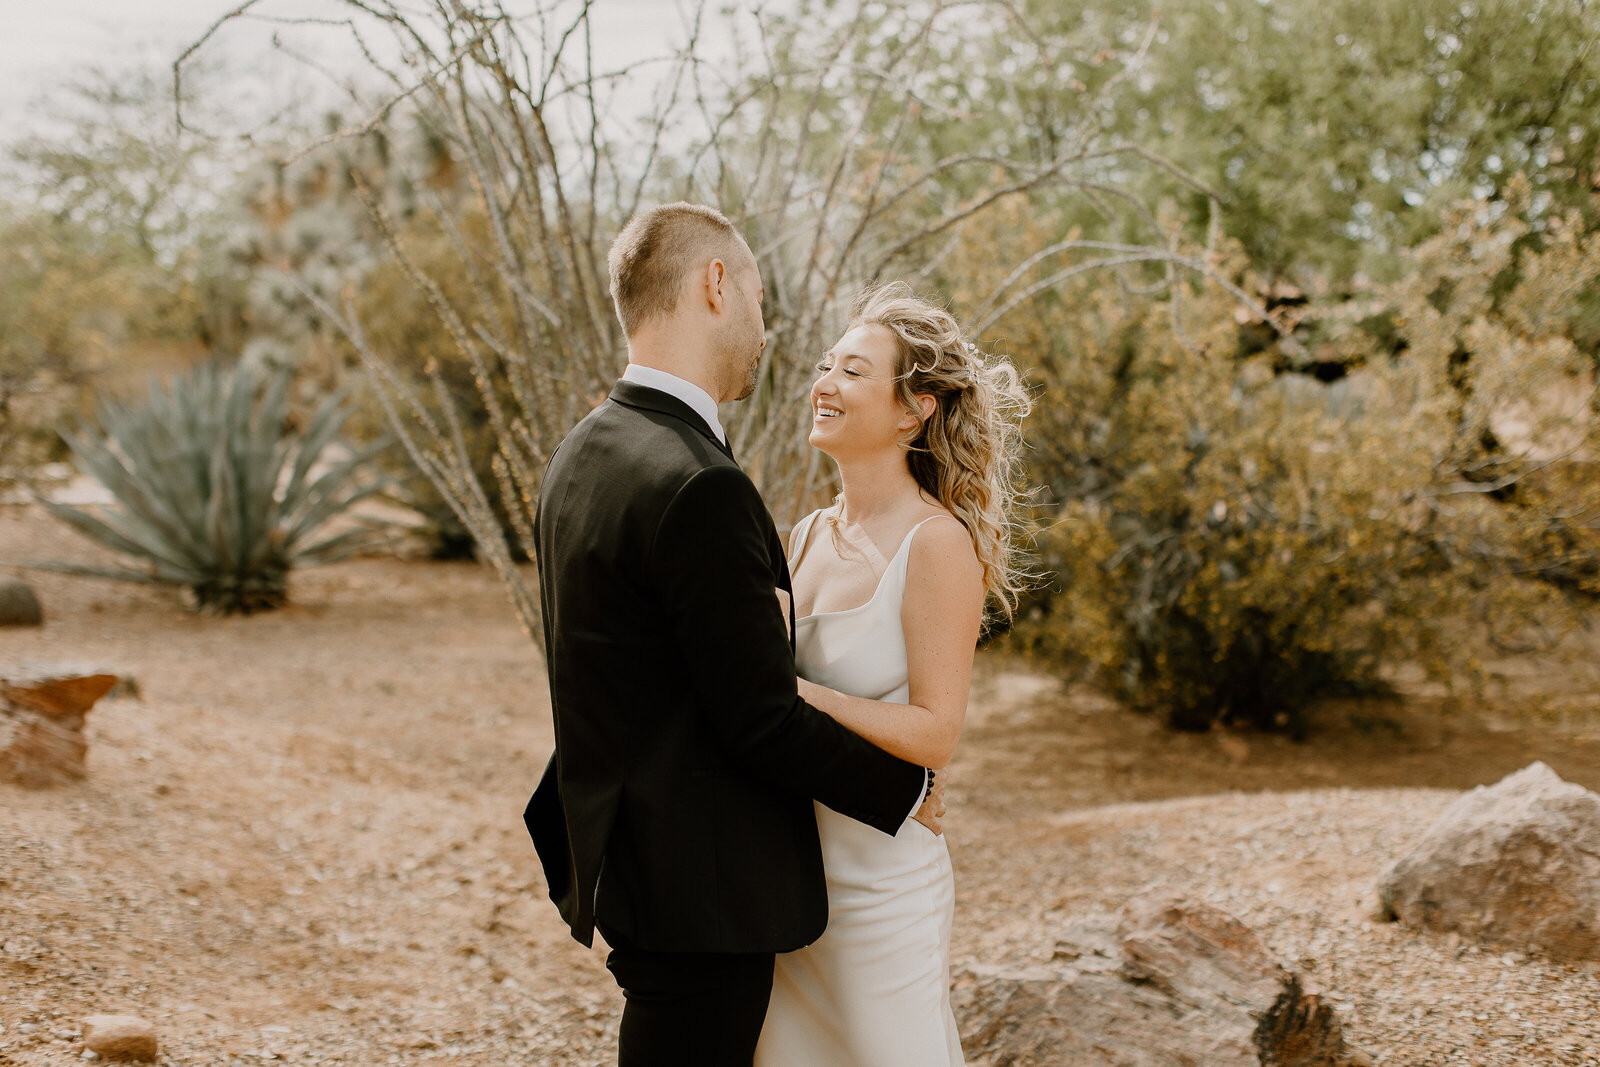 A couple with their arms around each other standing in a desert garden.